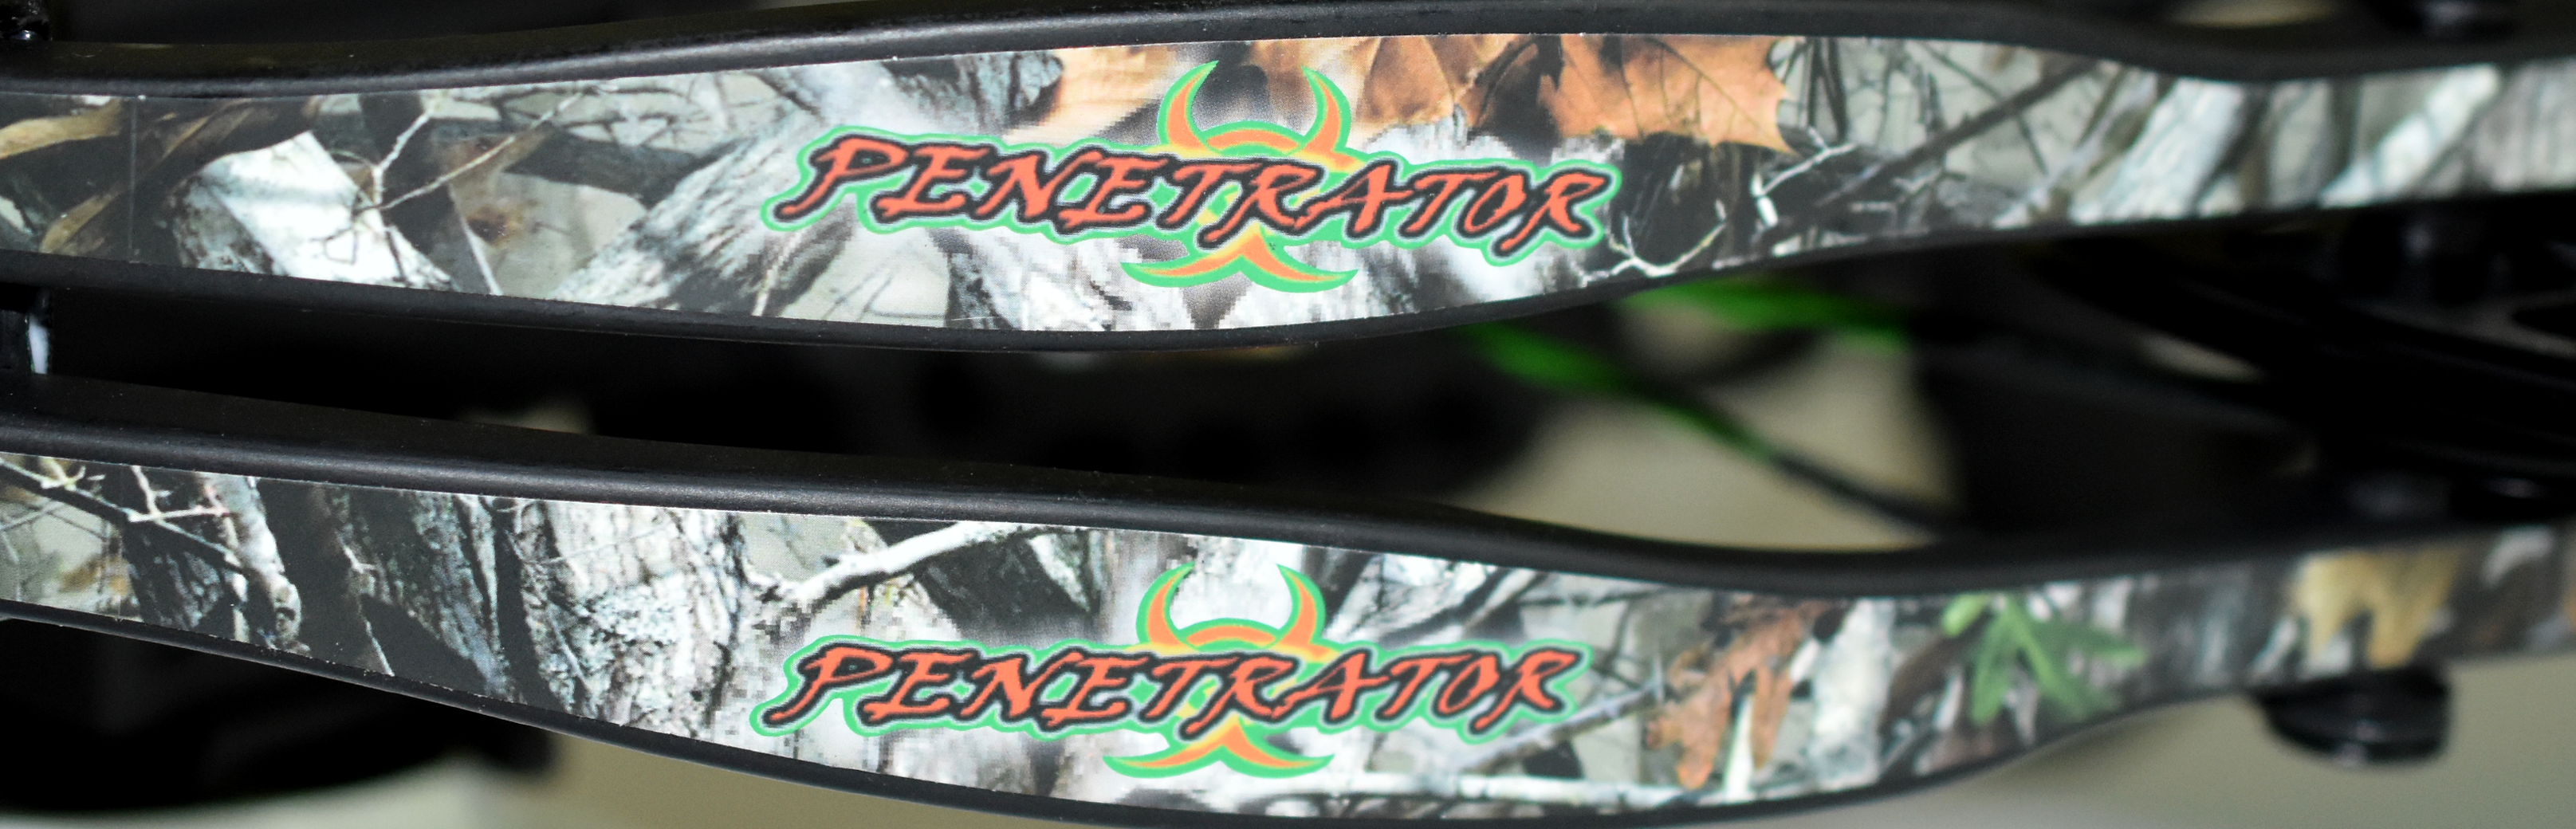 /archive/product/item/images/PENETRATOR/PENETRATOR-3.png